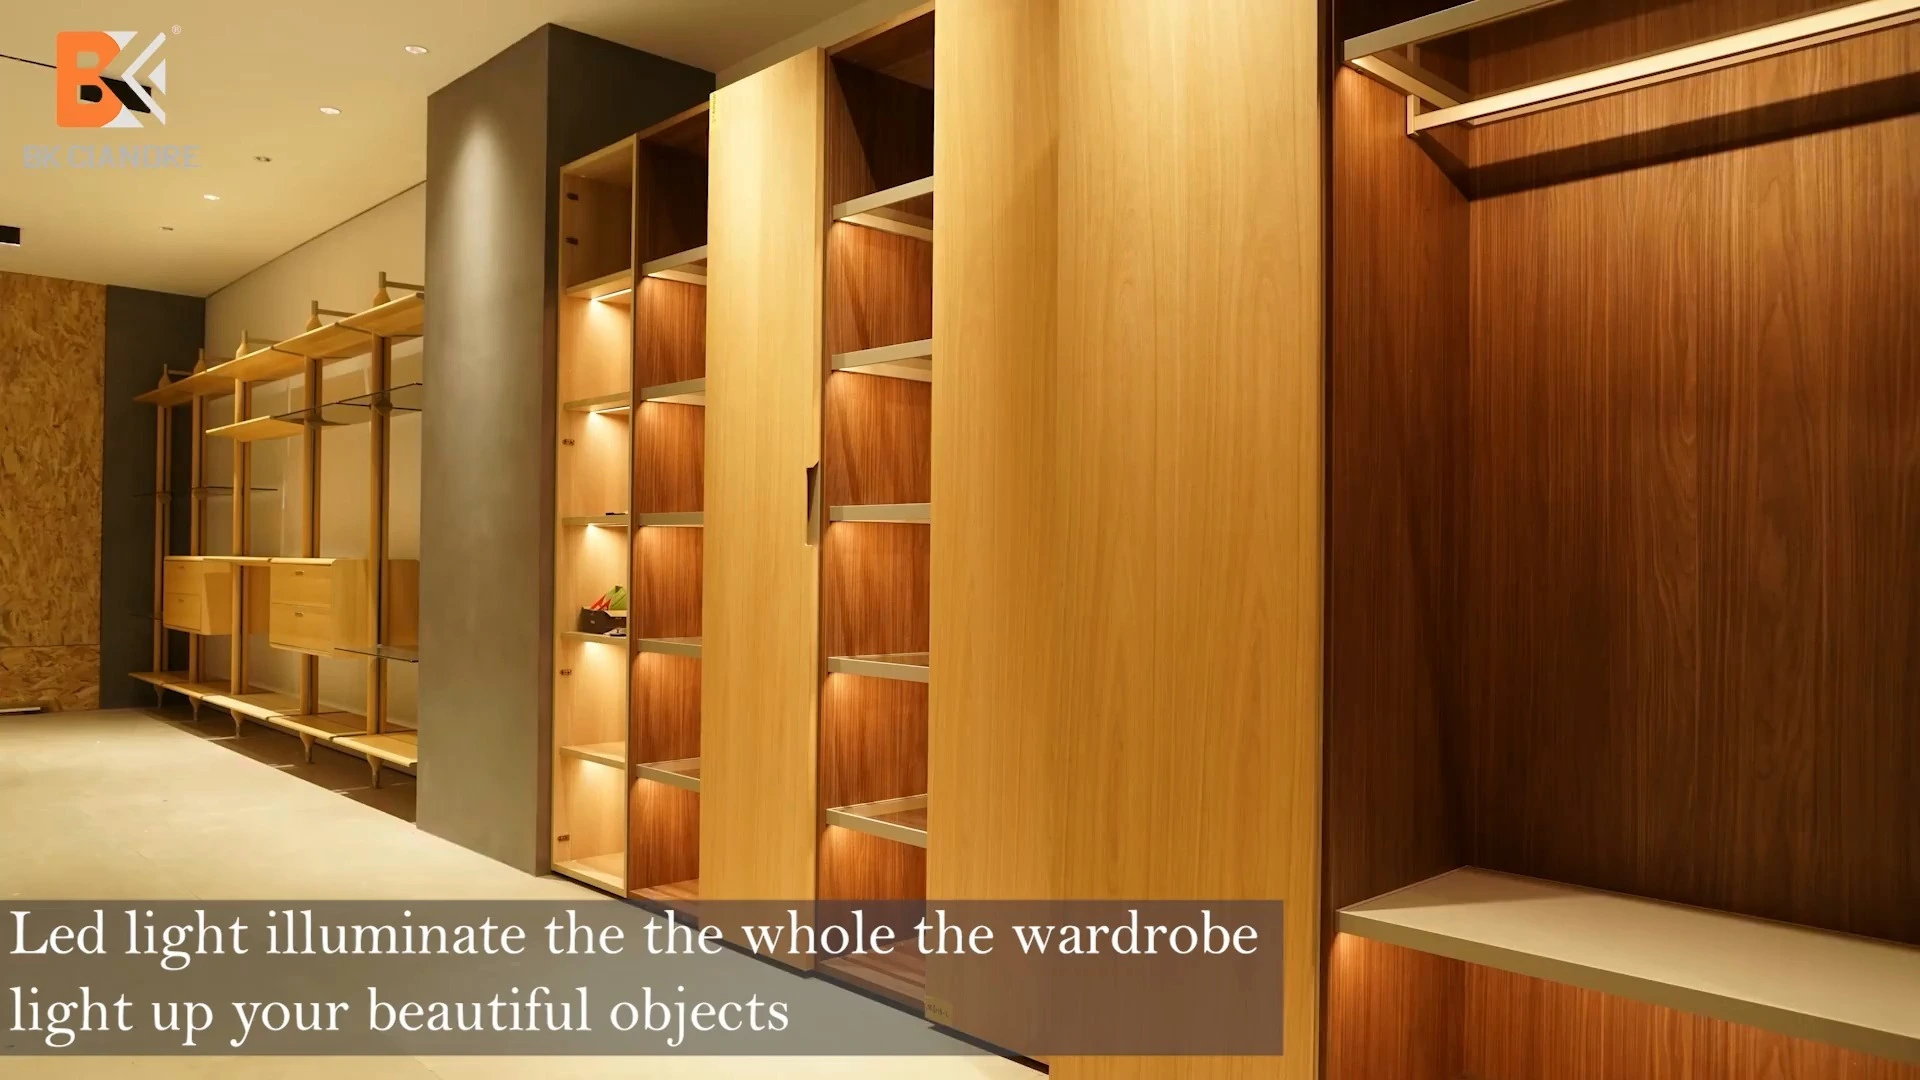 The Best Walk-In Closet Designs That You Are Going To Love [ Walk-In Closet ] 